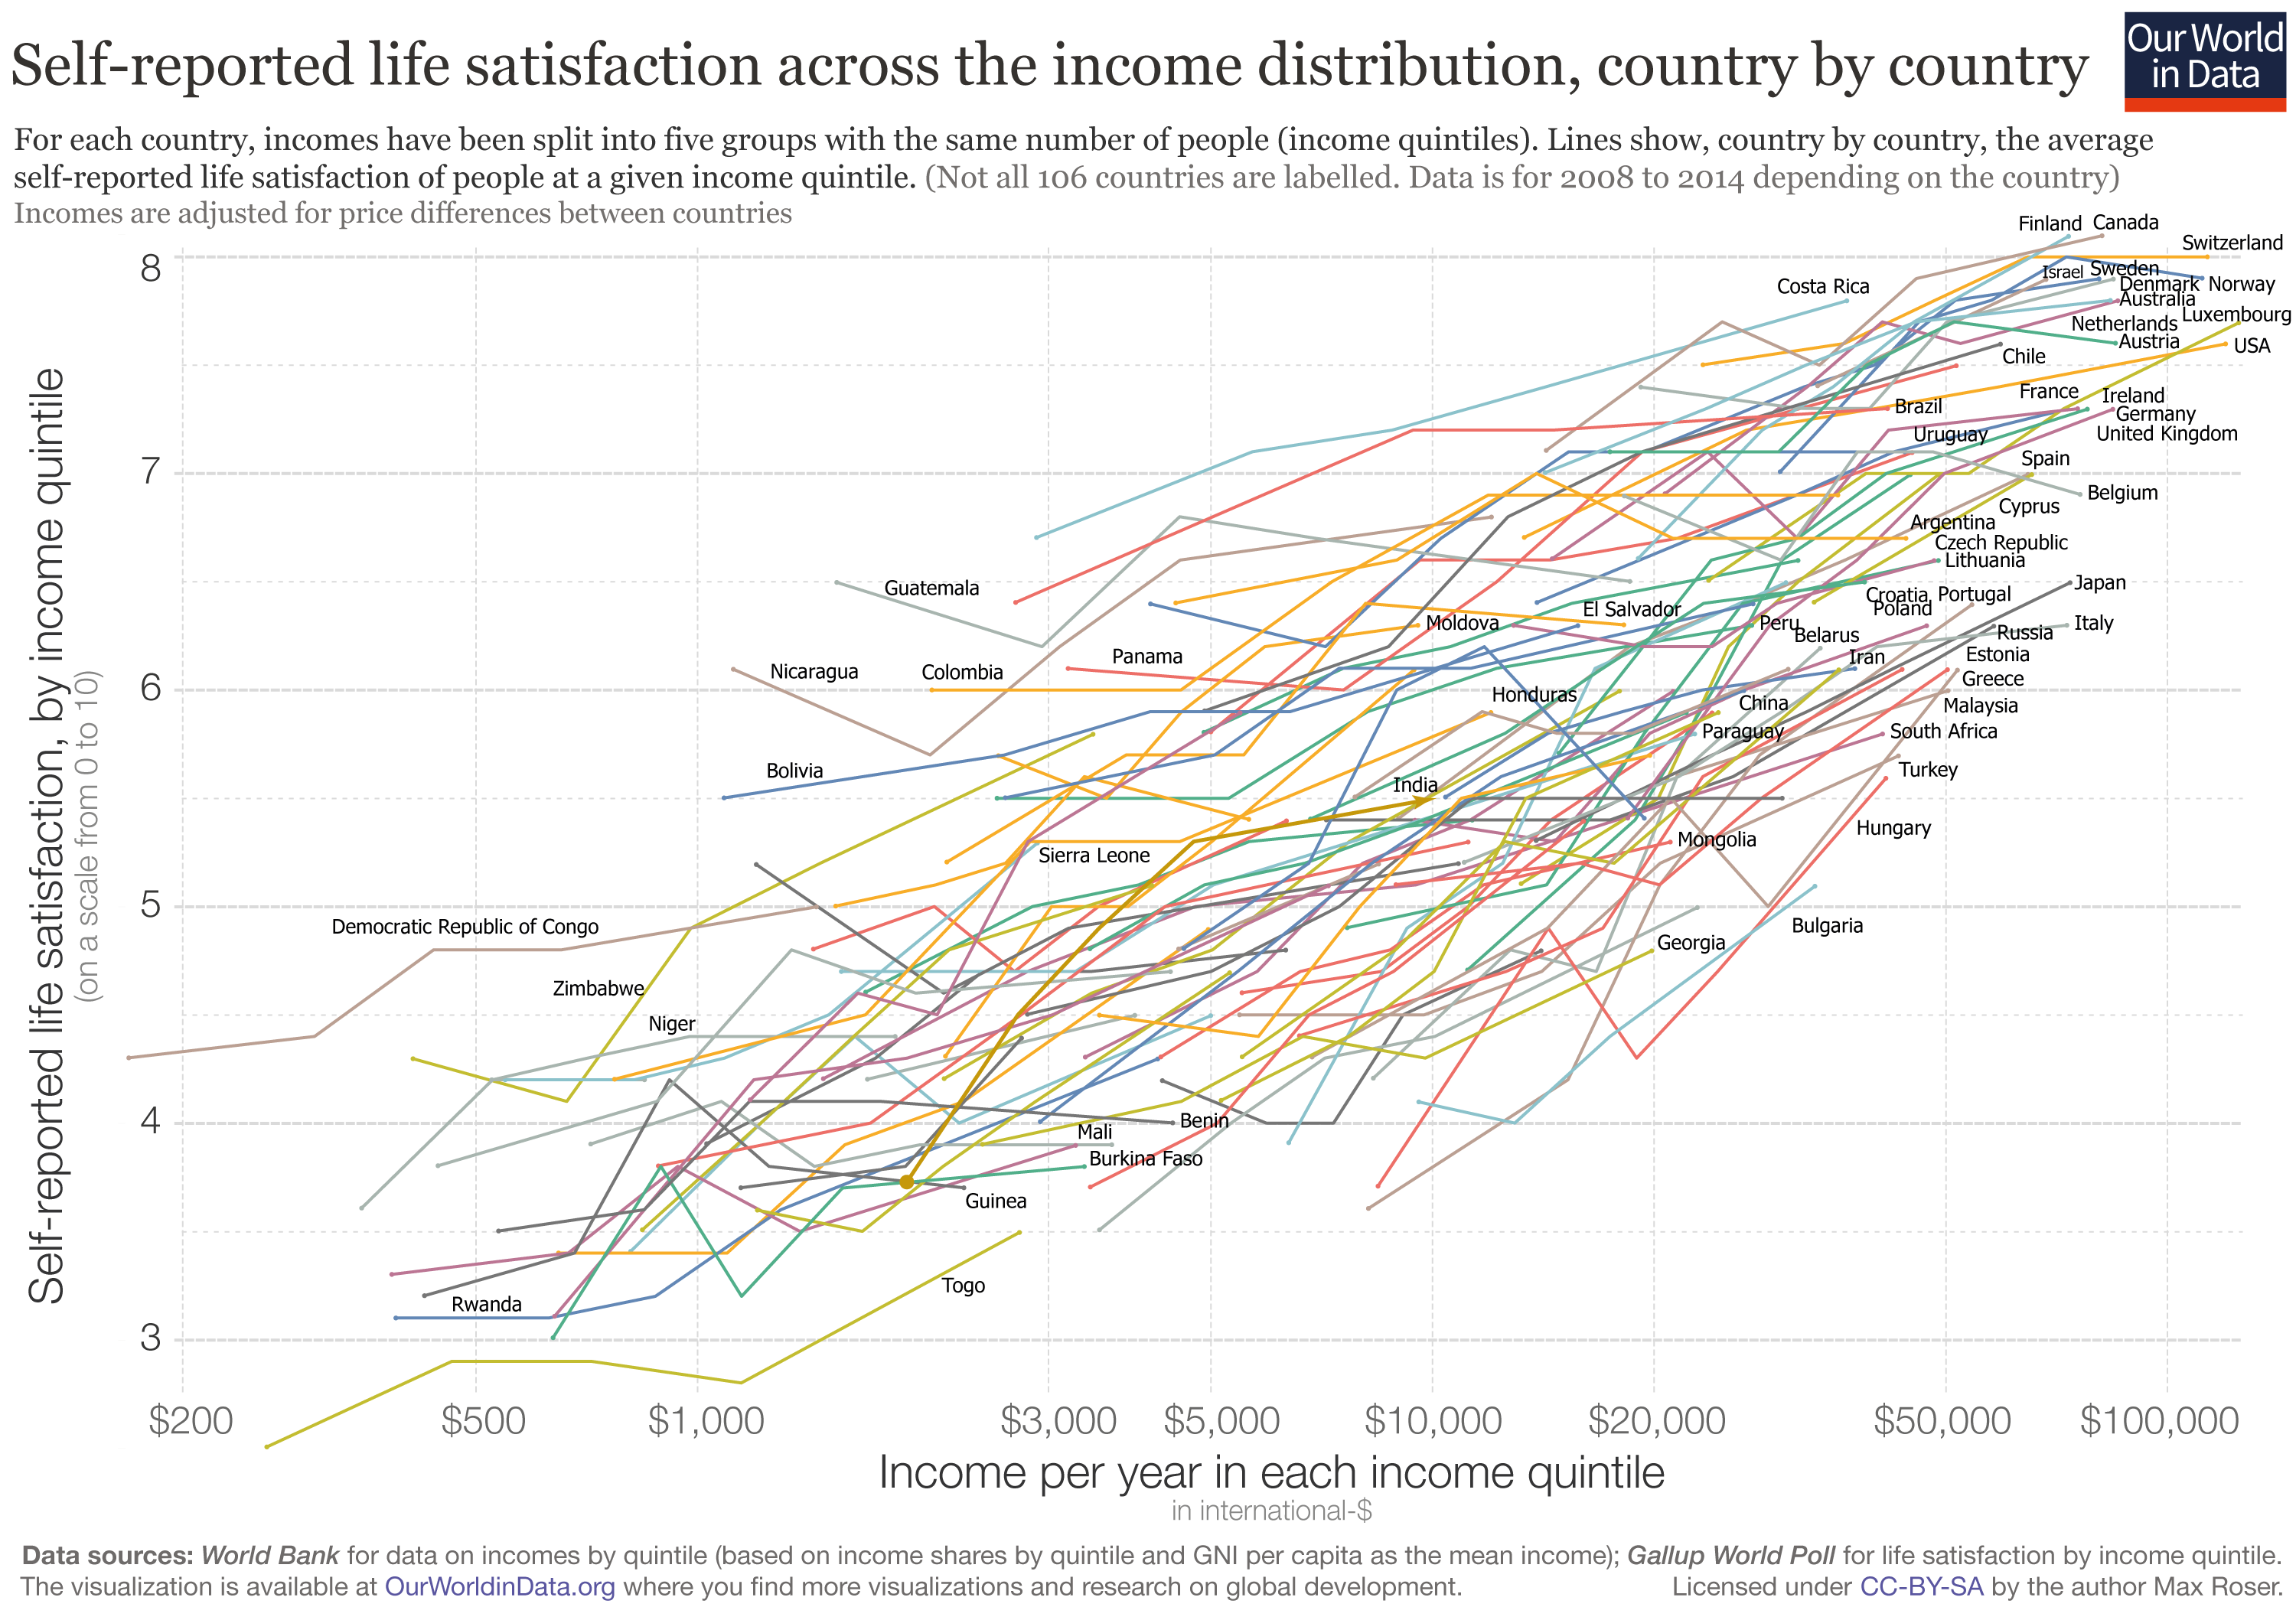 Self-reported life satisfactino across the income distribution, country by country